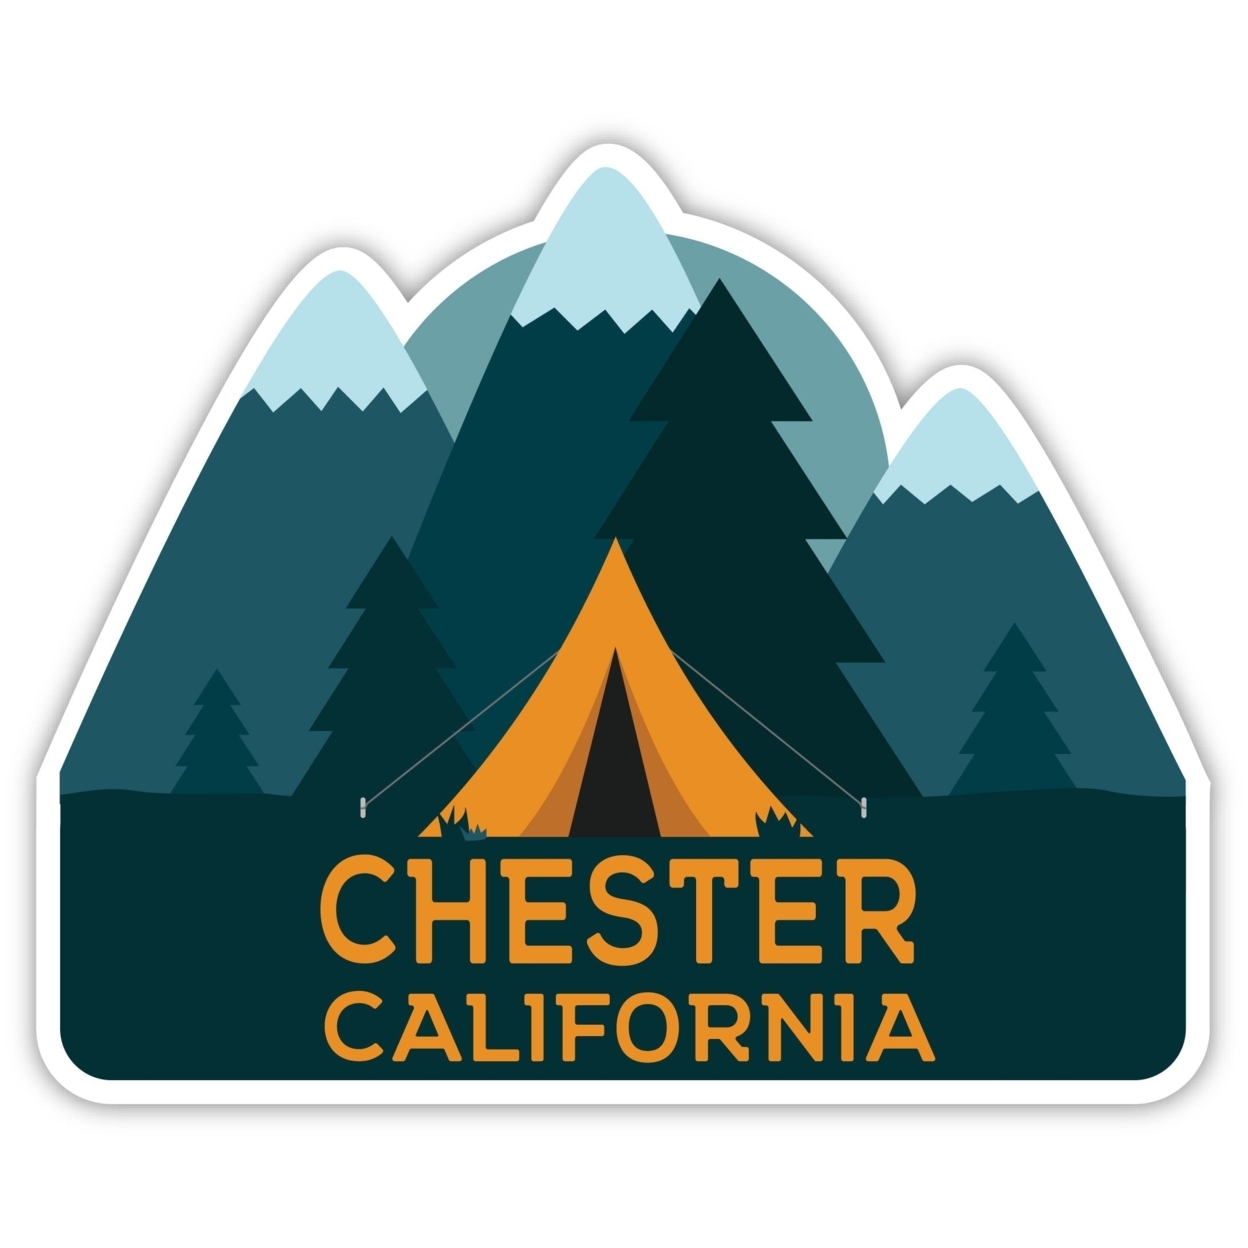 Chester California Souvenir Decorative Stickers (Choose Theme And Size) - 4-Pack, 2-Inch, Tent